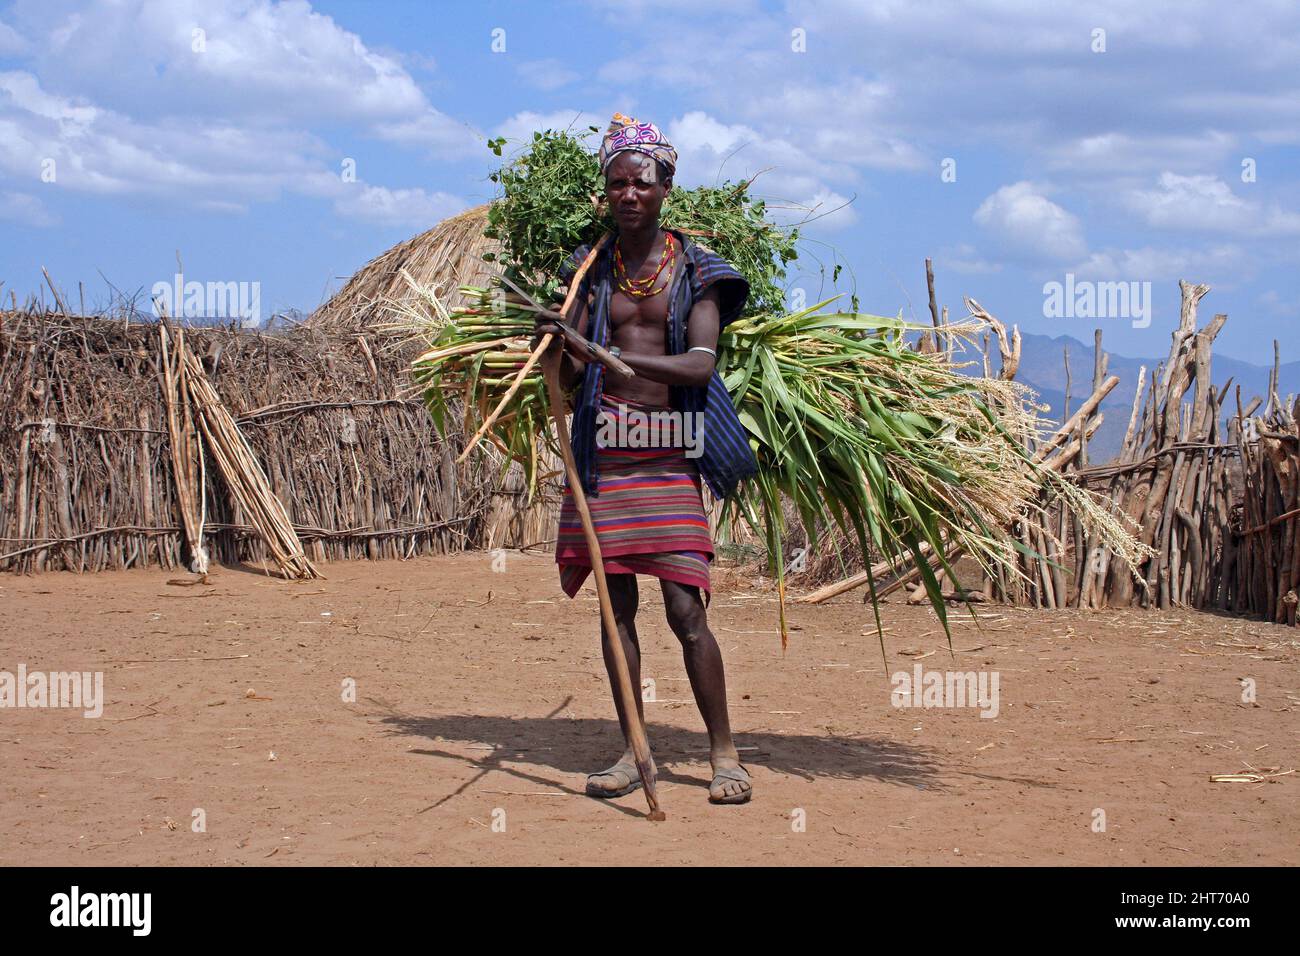 Arbore Tribe Man Carrying Crops Stock Photo